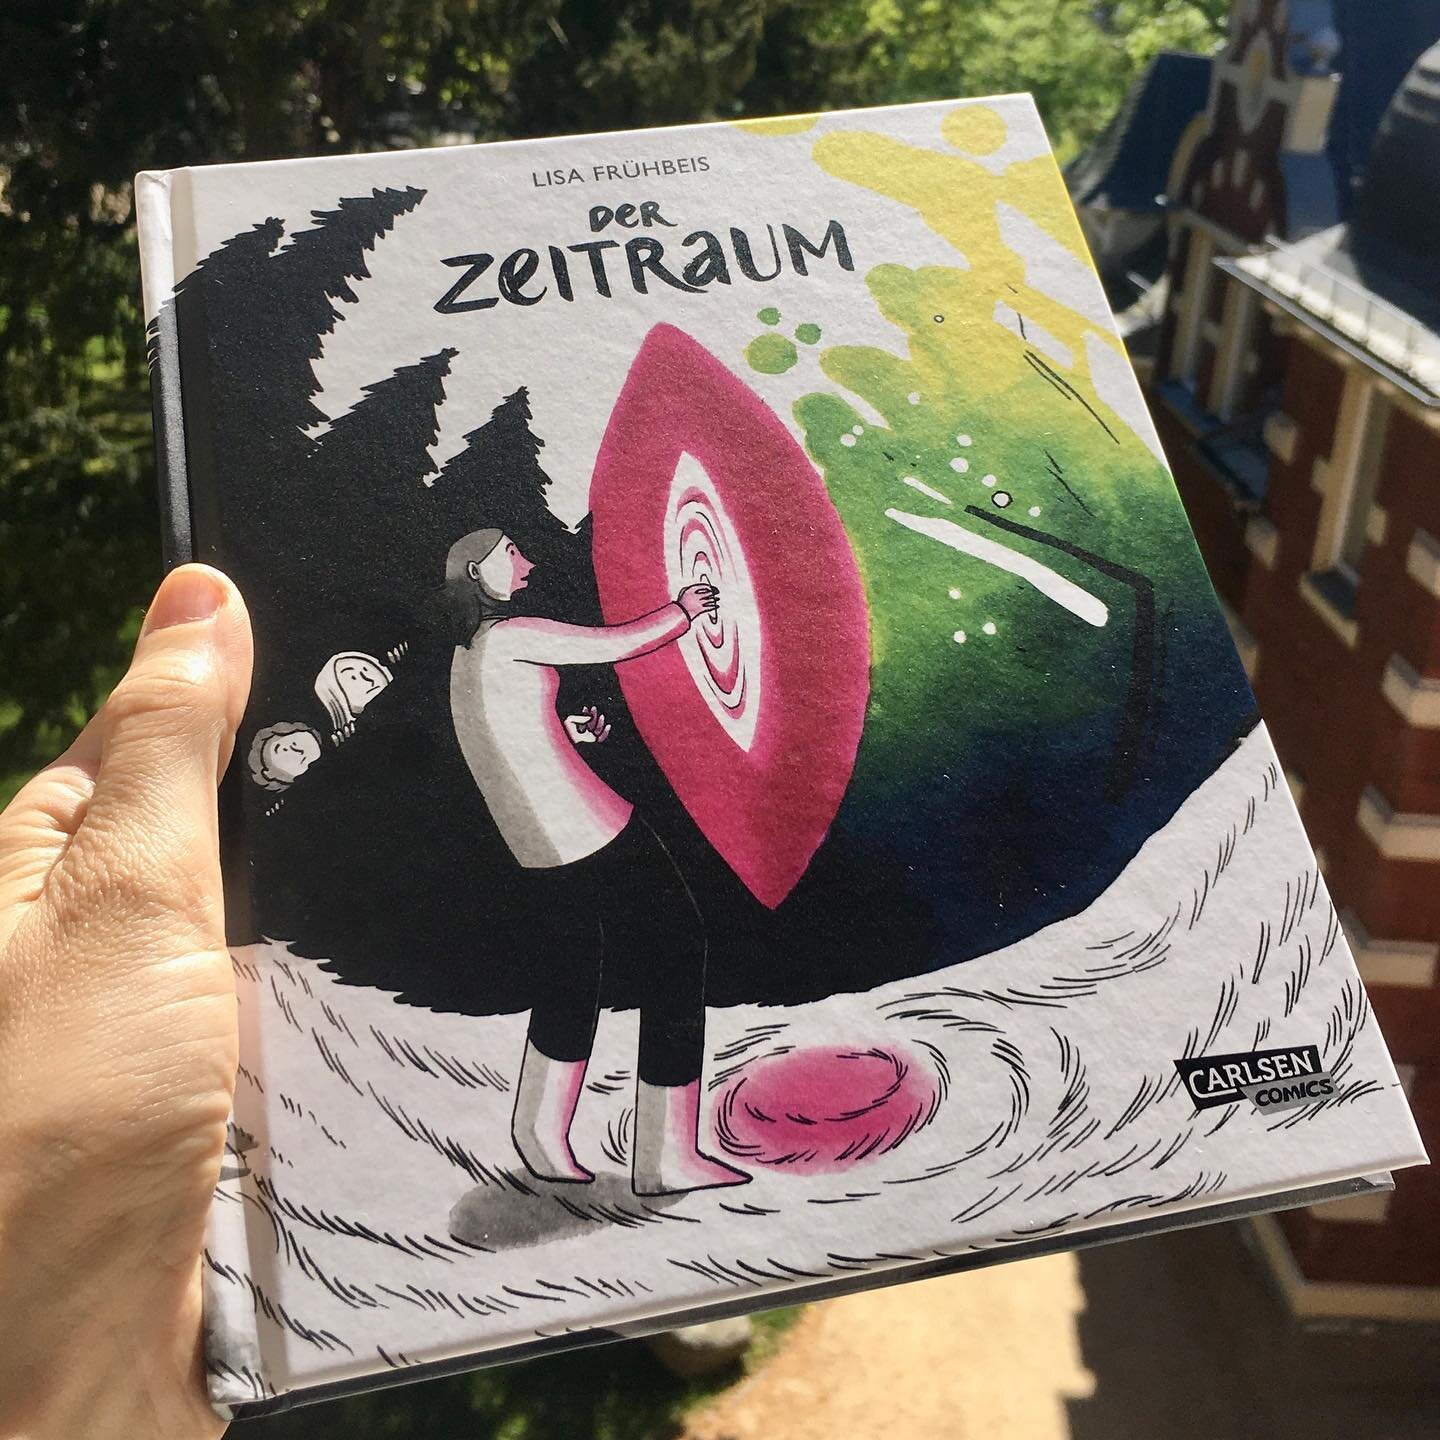 Finally! My book is out: &ldquo;Der Zeitraum&ldquo; appeared on May 31st at @carlsen_comics 🩷📗💫 I couldn&rsquo;t be happier! 

With super cool quotes by @doris_doerrie and @tilliewalden - thank you!! 

Lots of scanning and cleaning help came from 